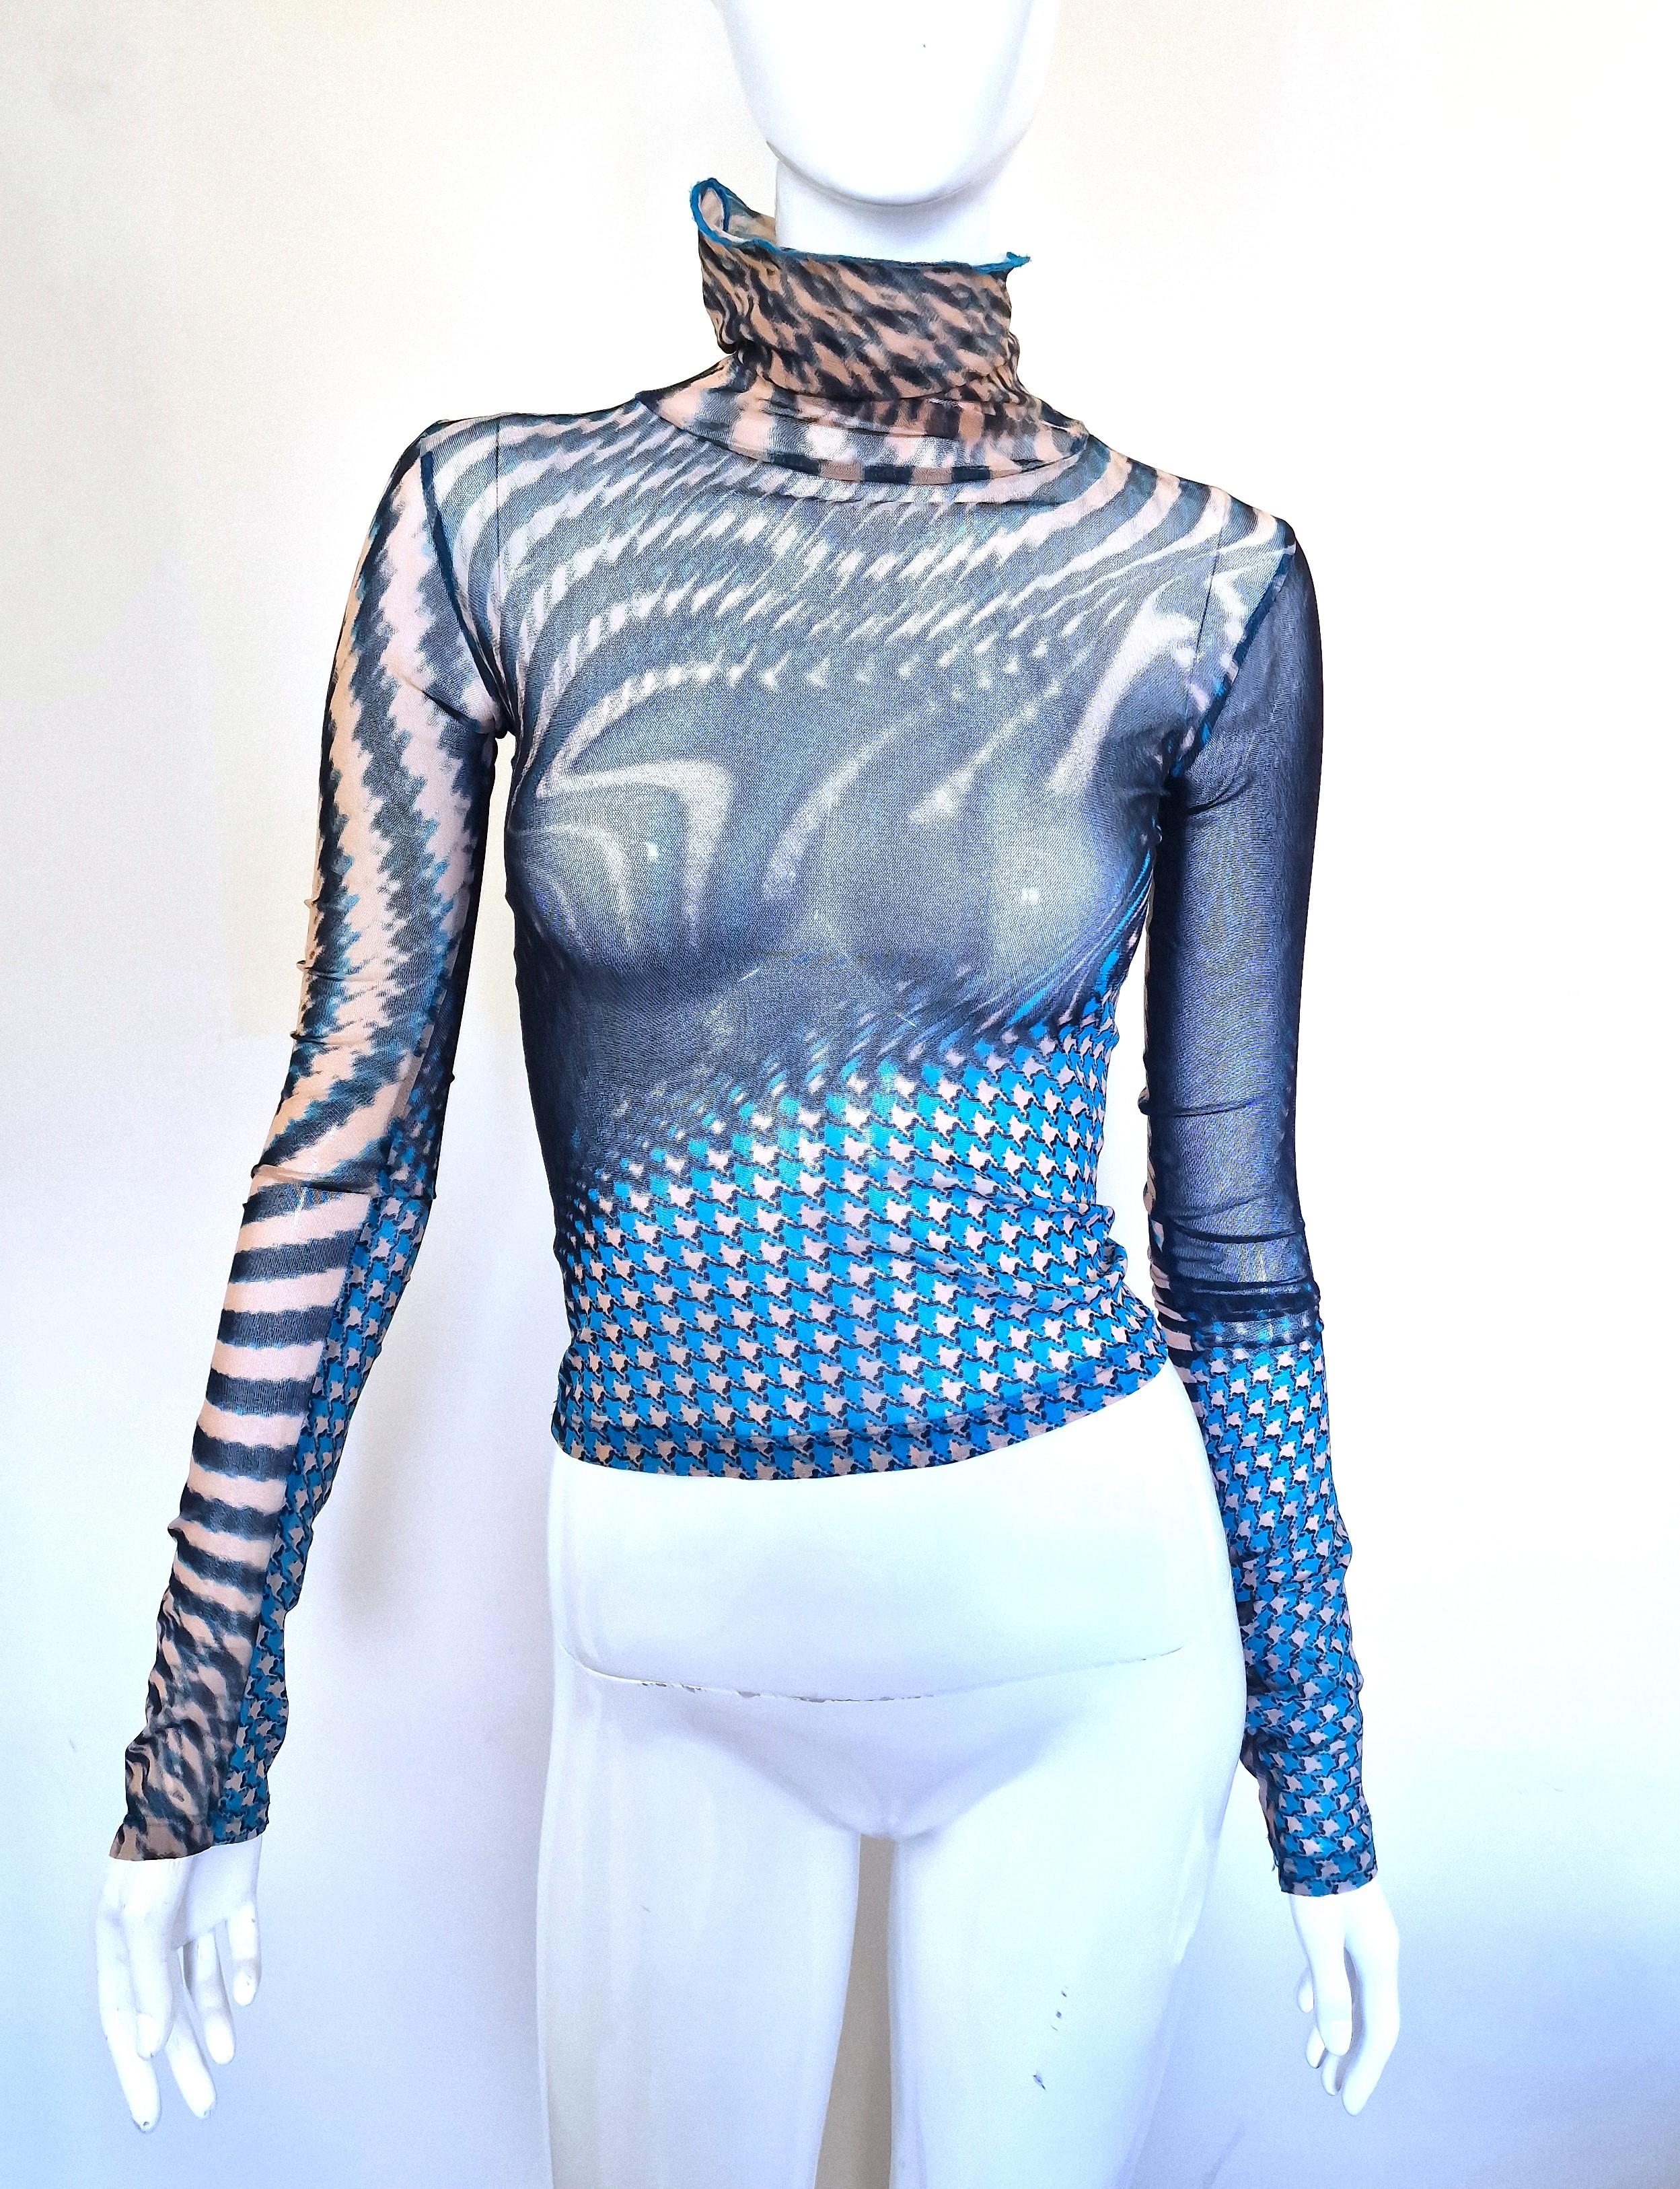 Psychedelic mesh top by Cavalli!
Transparent. 
Extra long sleeves!
Turtleneck.
EXCELLENT condition!

SIZE
Fits from XS to S.
Makred size: IT40.
Length: 50 cm / 19.7 inch
Bust: 30 cm / 11.8 inch
Sleeve: 68 cm / 26.8 inch